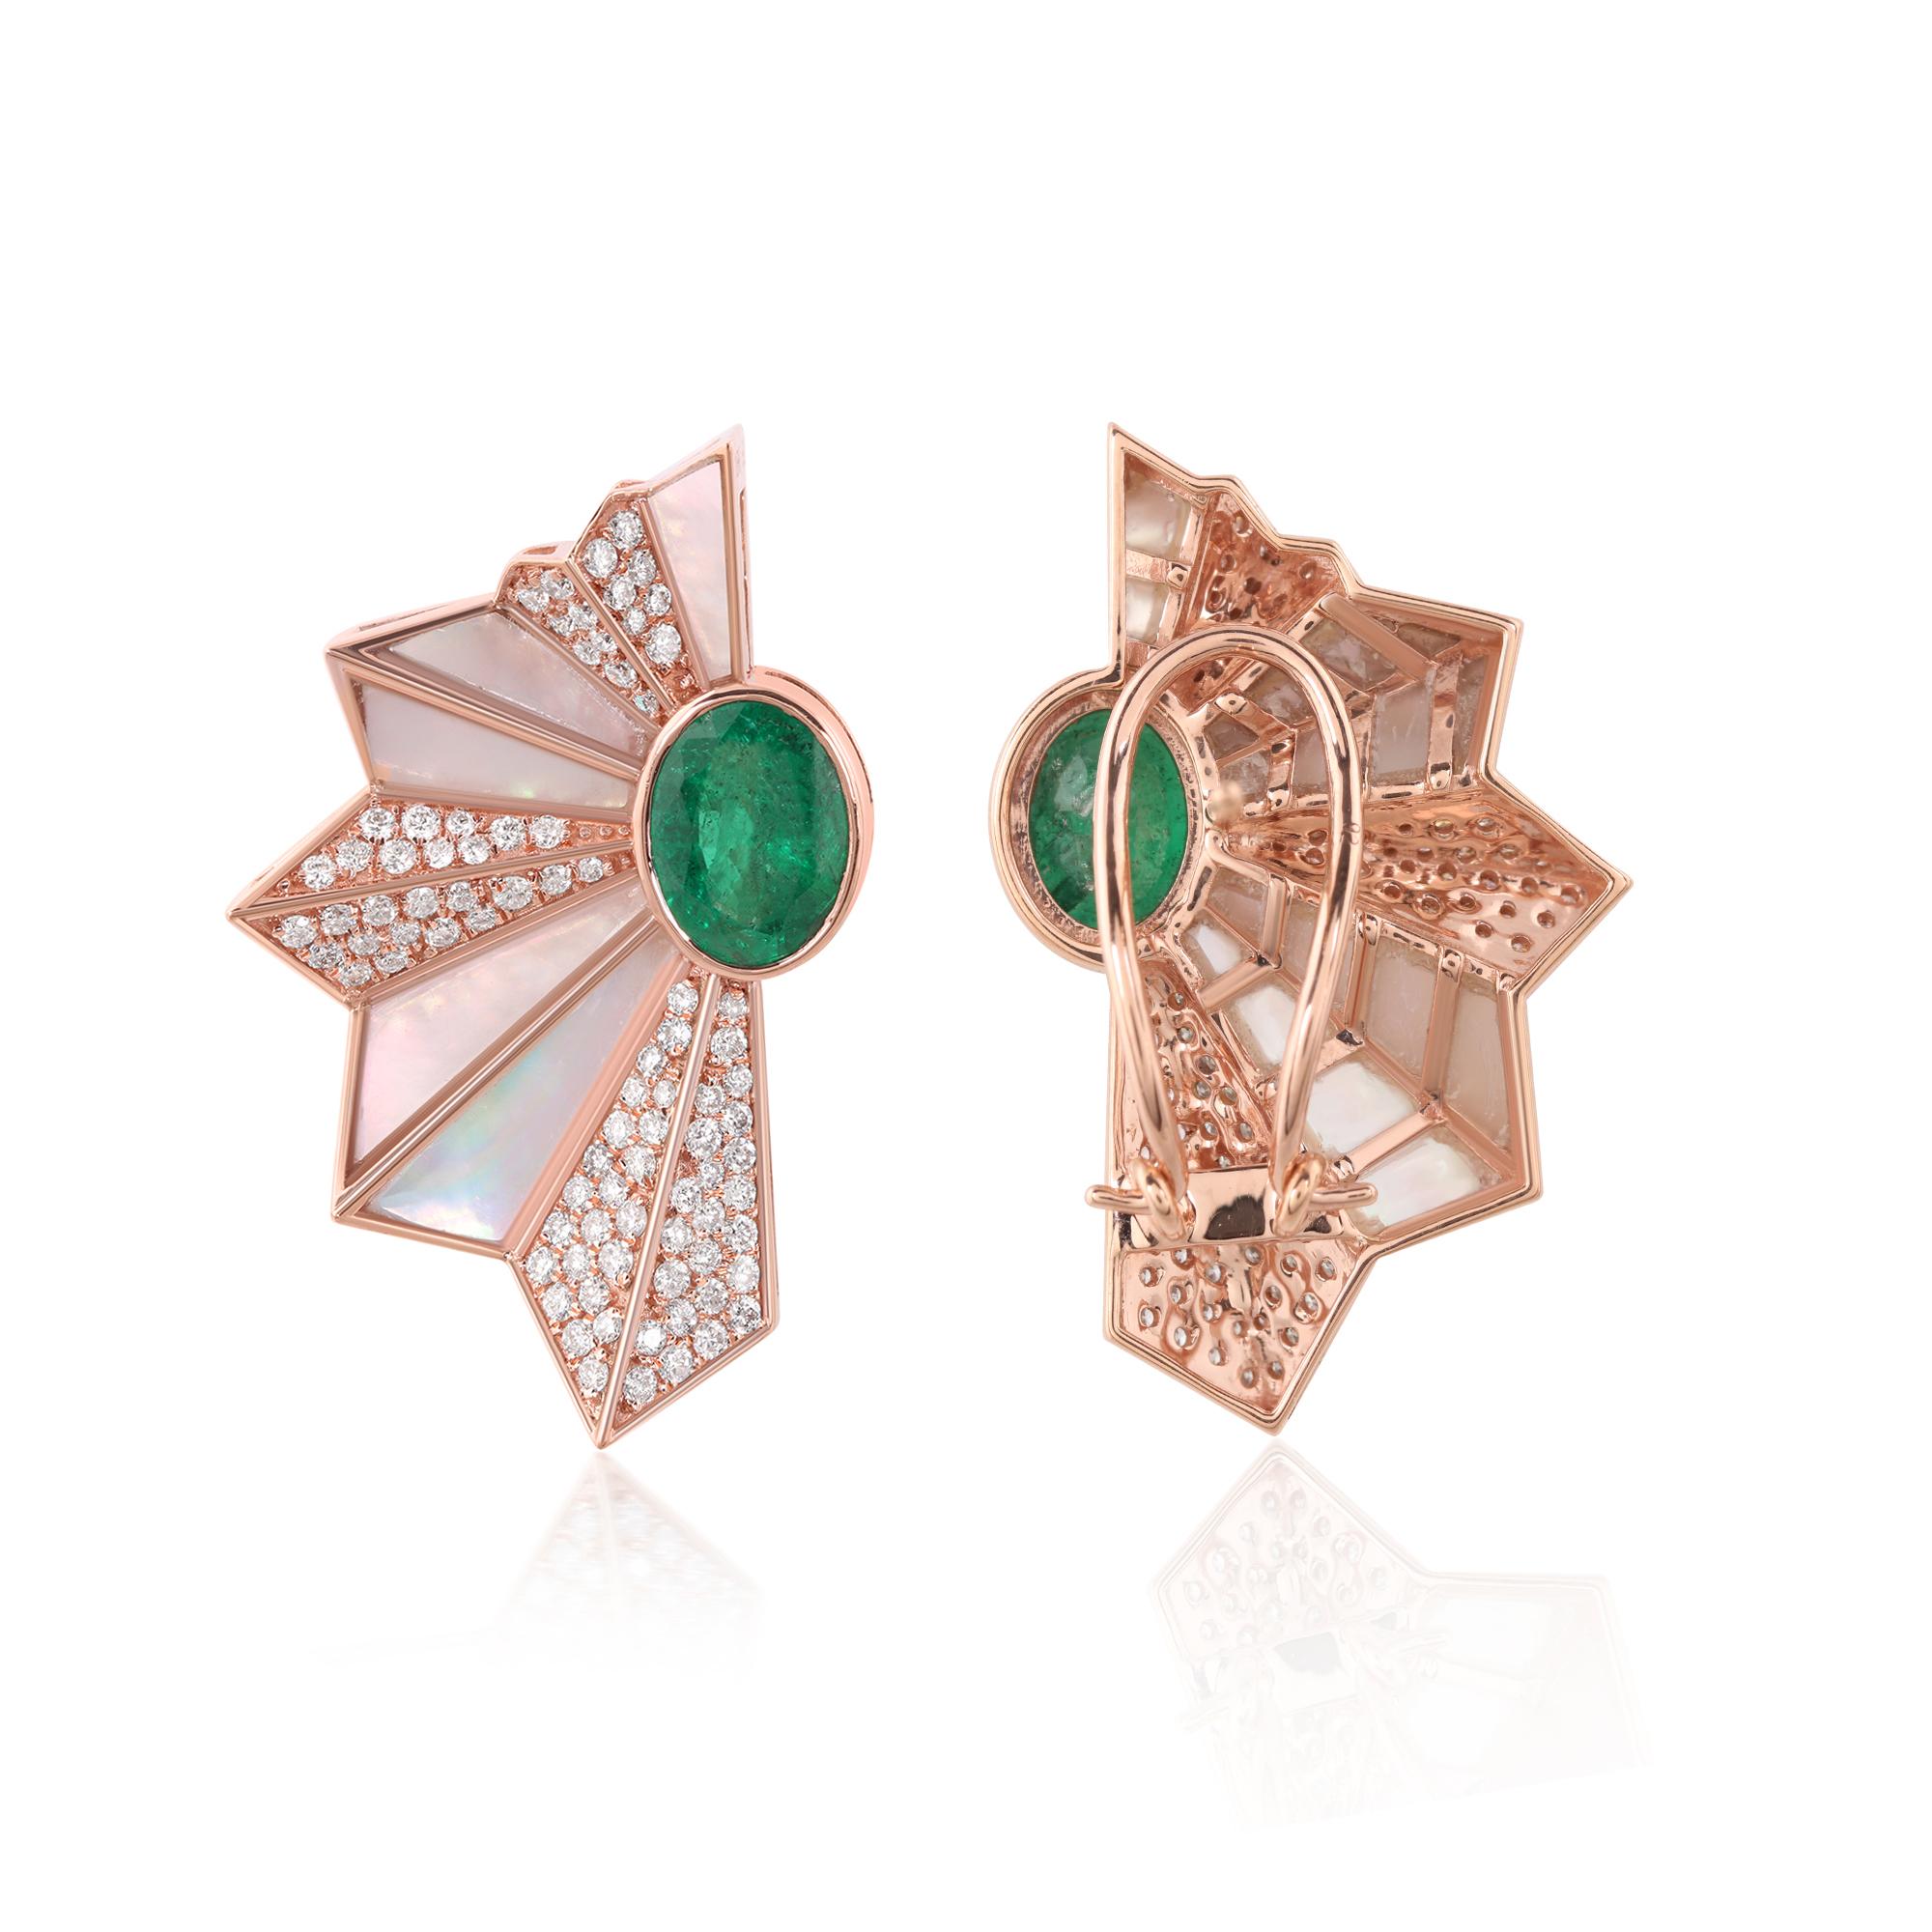 Adorning the outer edges of the fan motif are dazzling diamonds, meticulously set to enhance the radiance of the emeralds and accentuate the intricate detailing of the design. Each diamond sparkles with unrivaled brilliance, reflecting the light